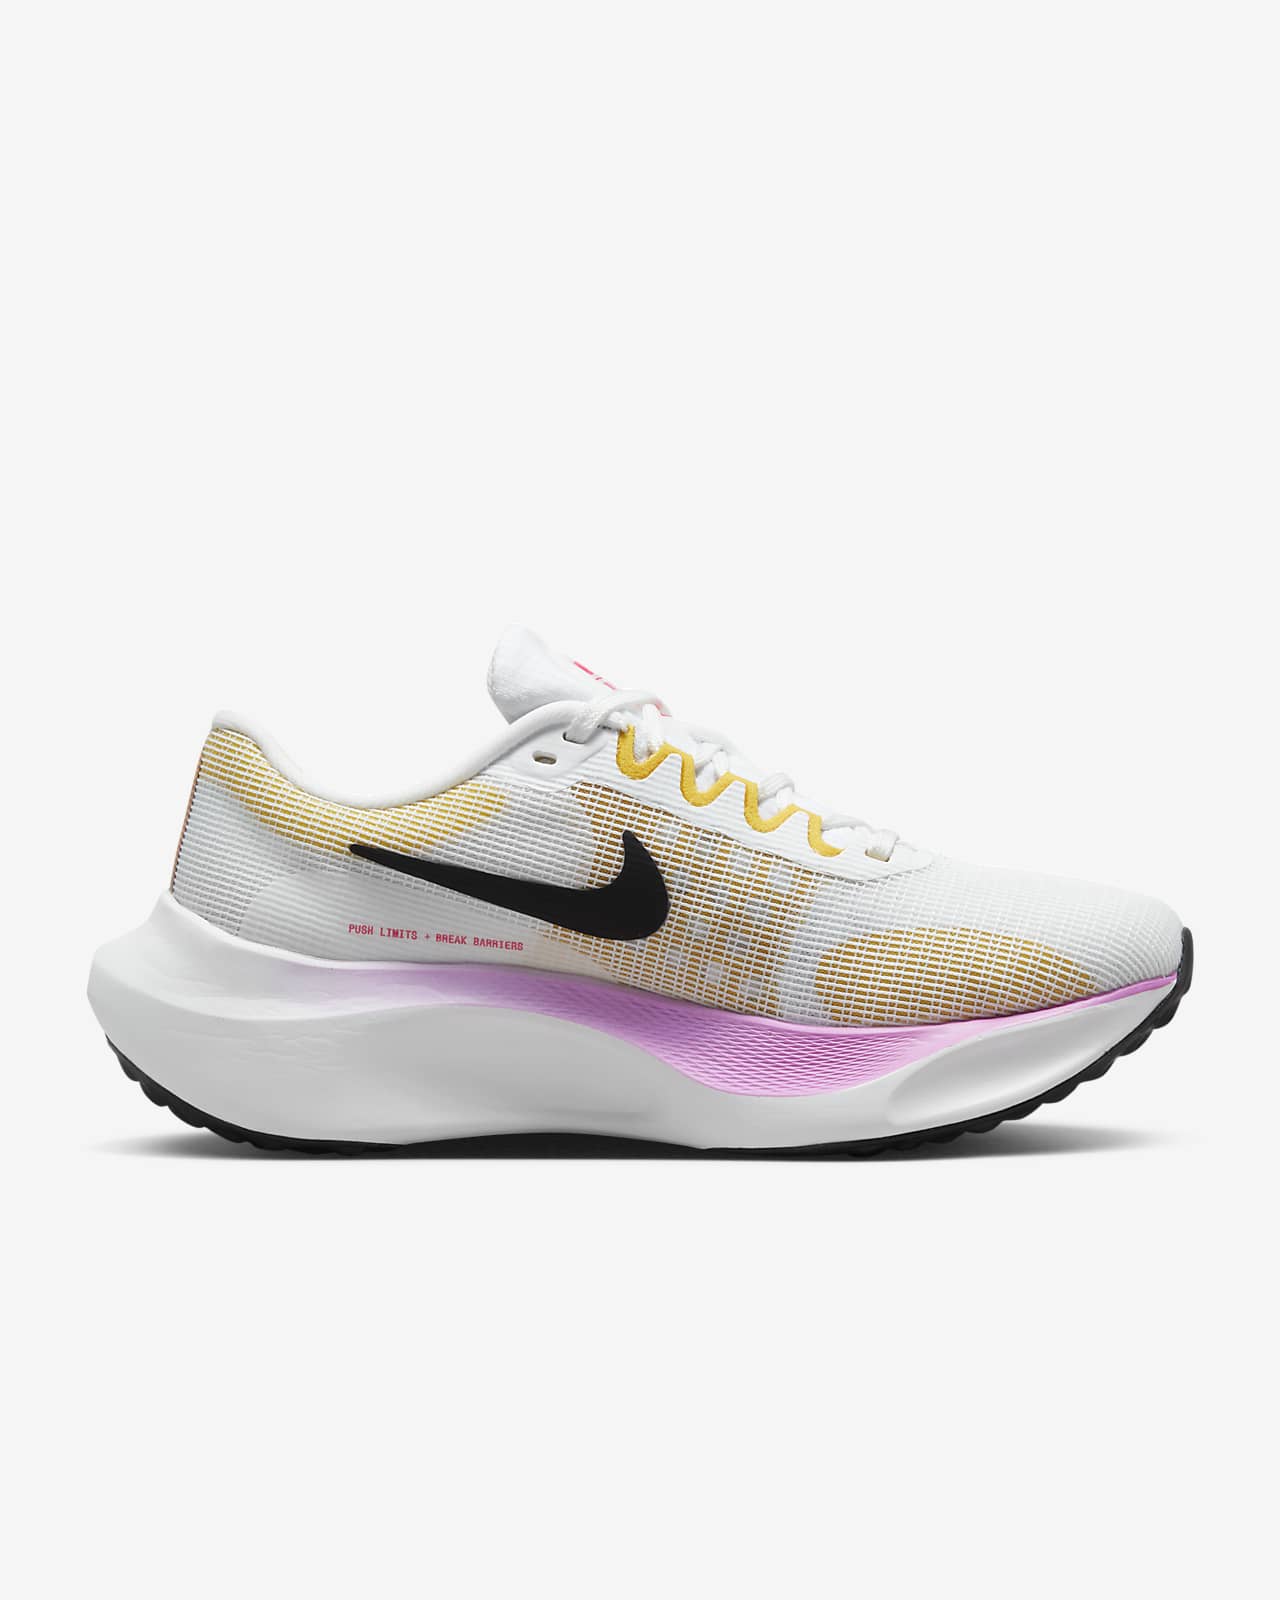 Nike Fly 5 Women's Road Running Shoes.